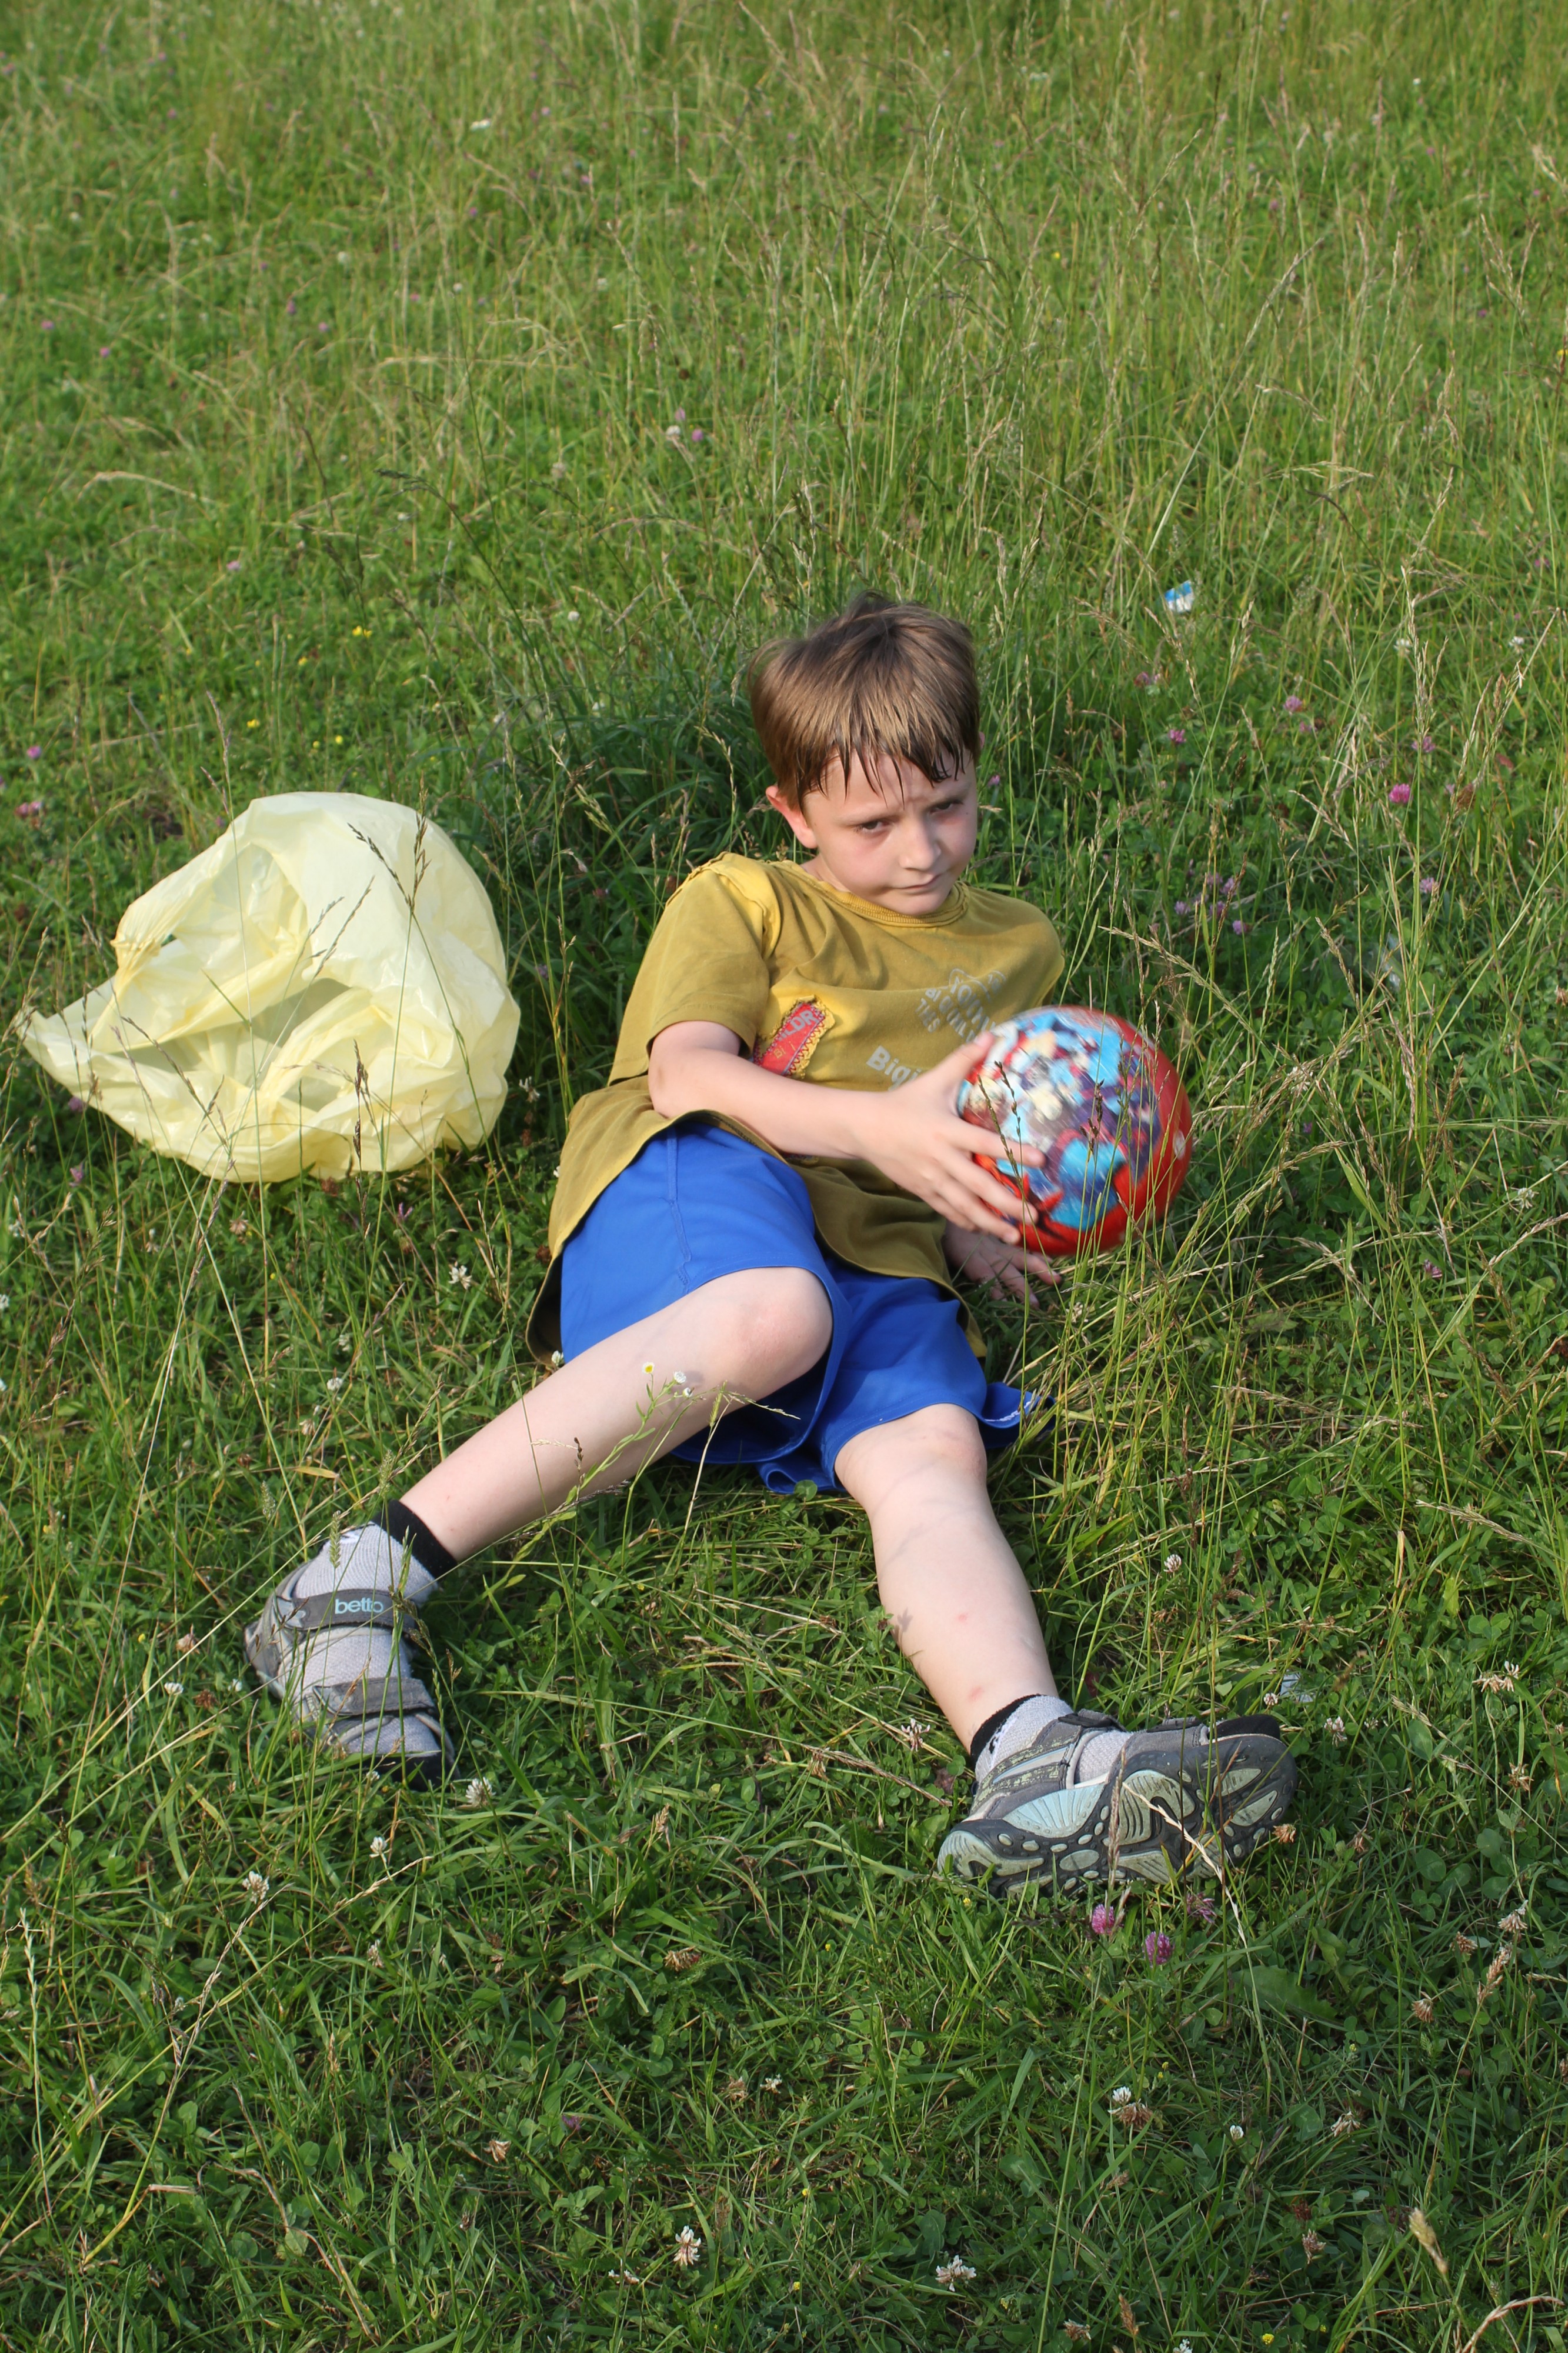 A boy with a ball in a Catholic camp for children (vacations with God), June 2012, picture 130